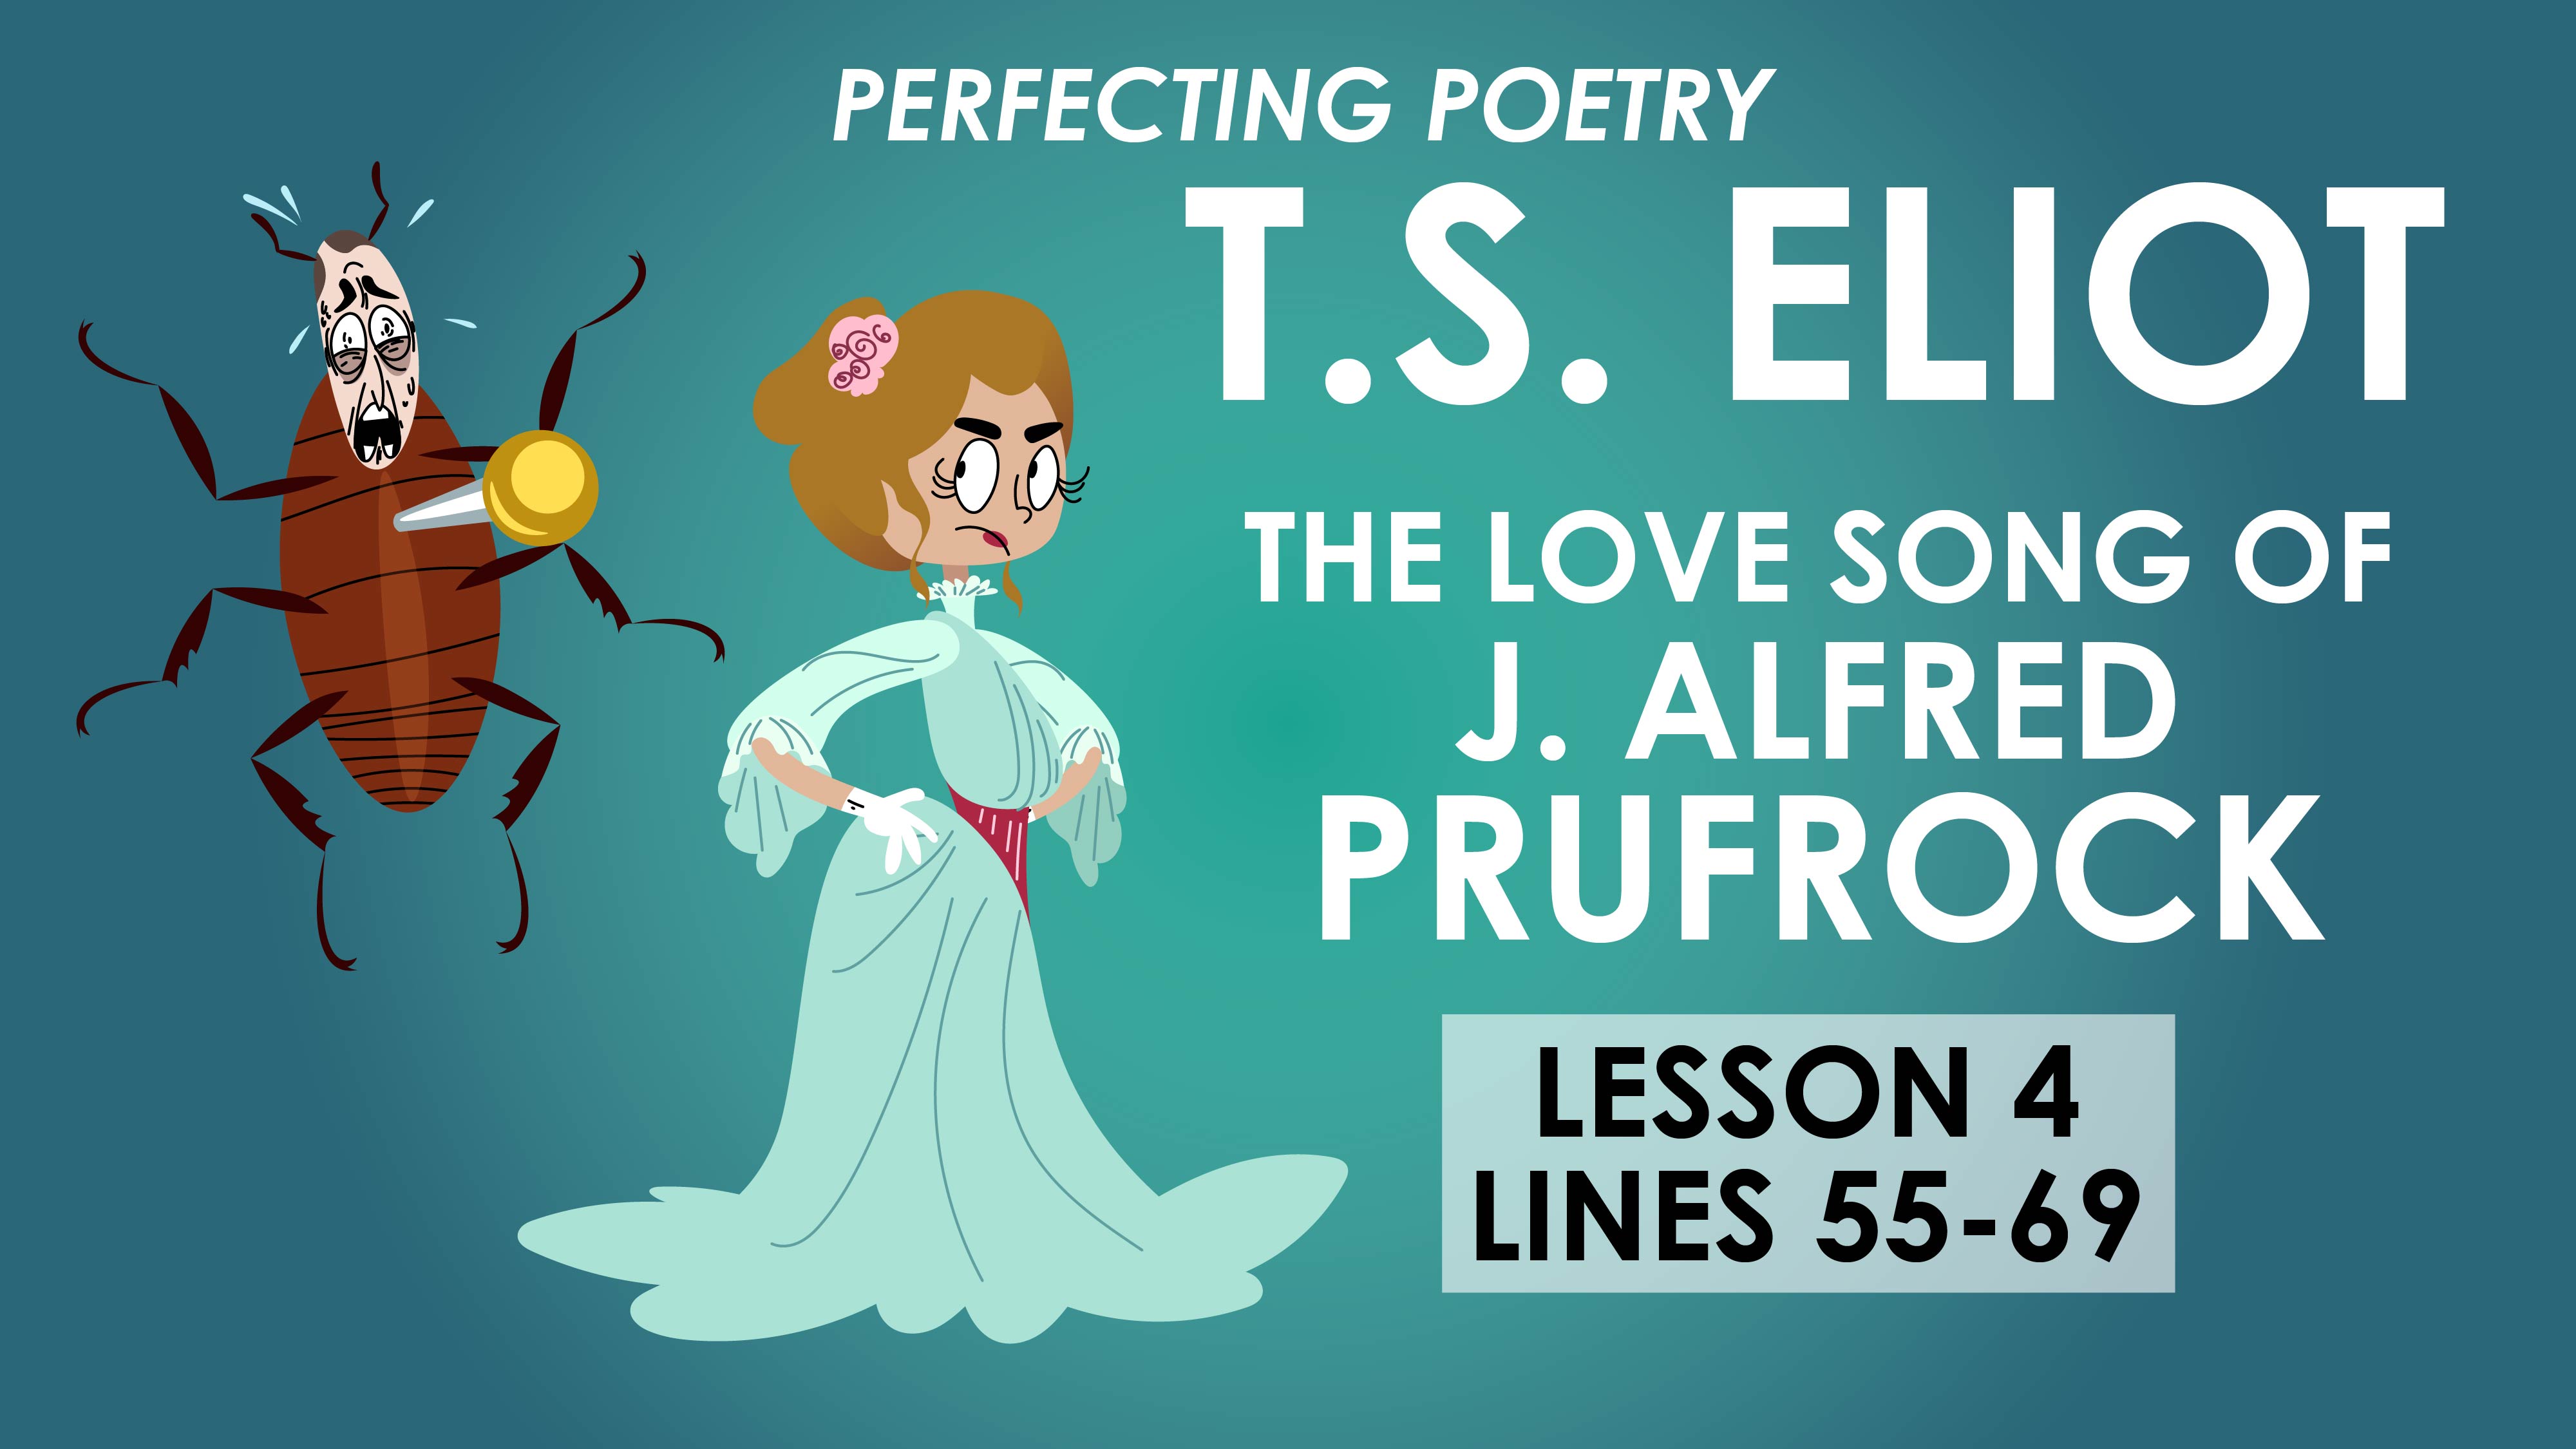 The Love Song of J. Alfred Prufrock - Lesson 4 - T.S. Eliot - Perfecting Poetry